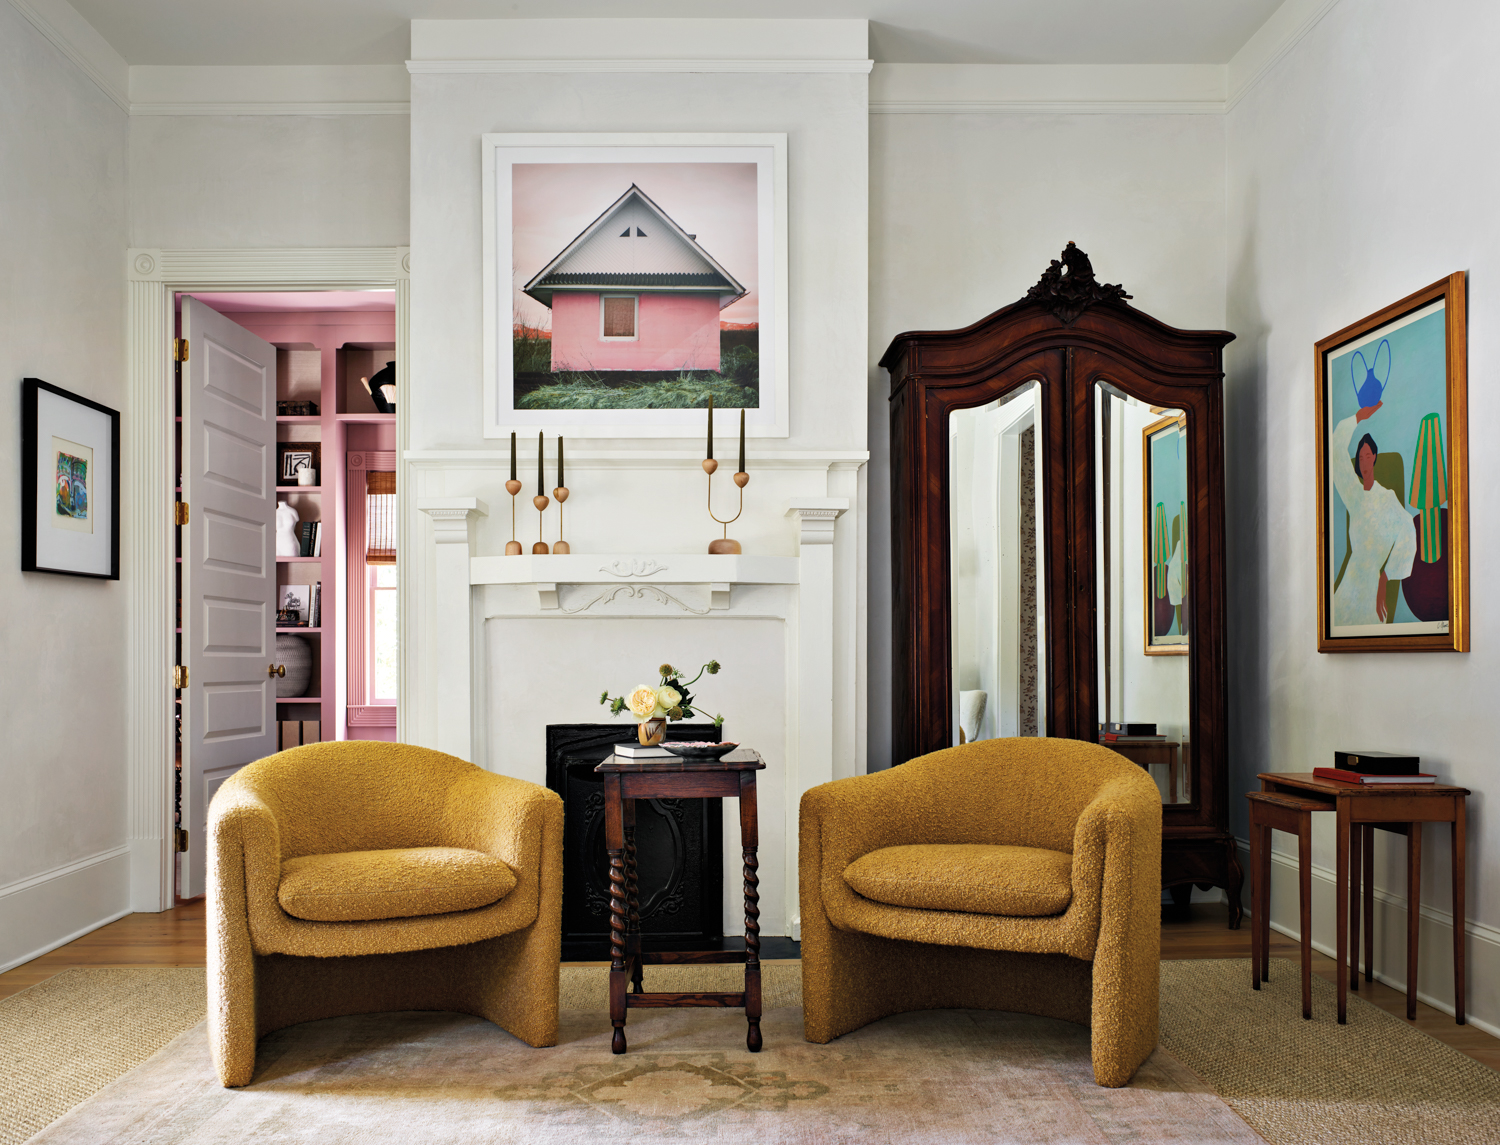 Sitting room with ochre-colored armchairs,...